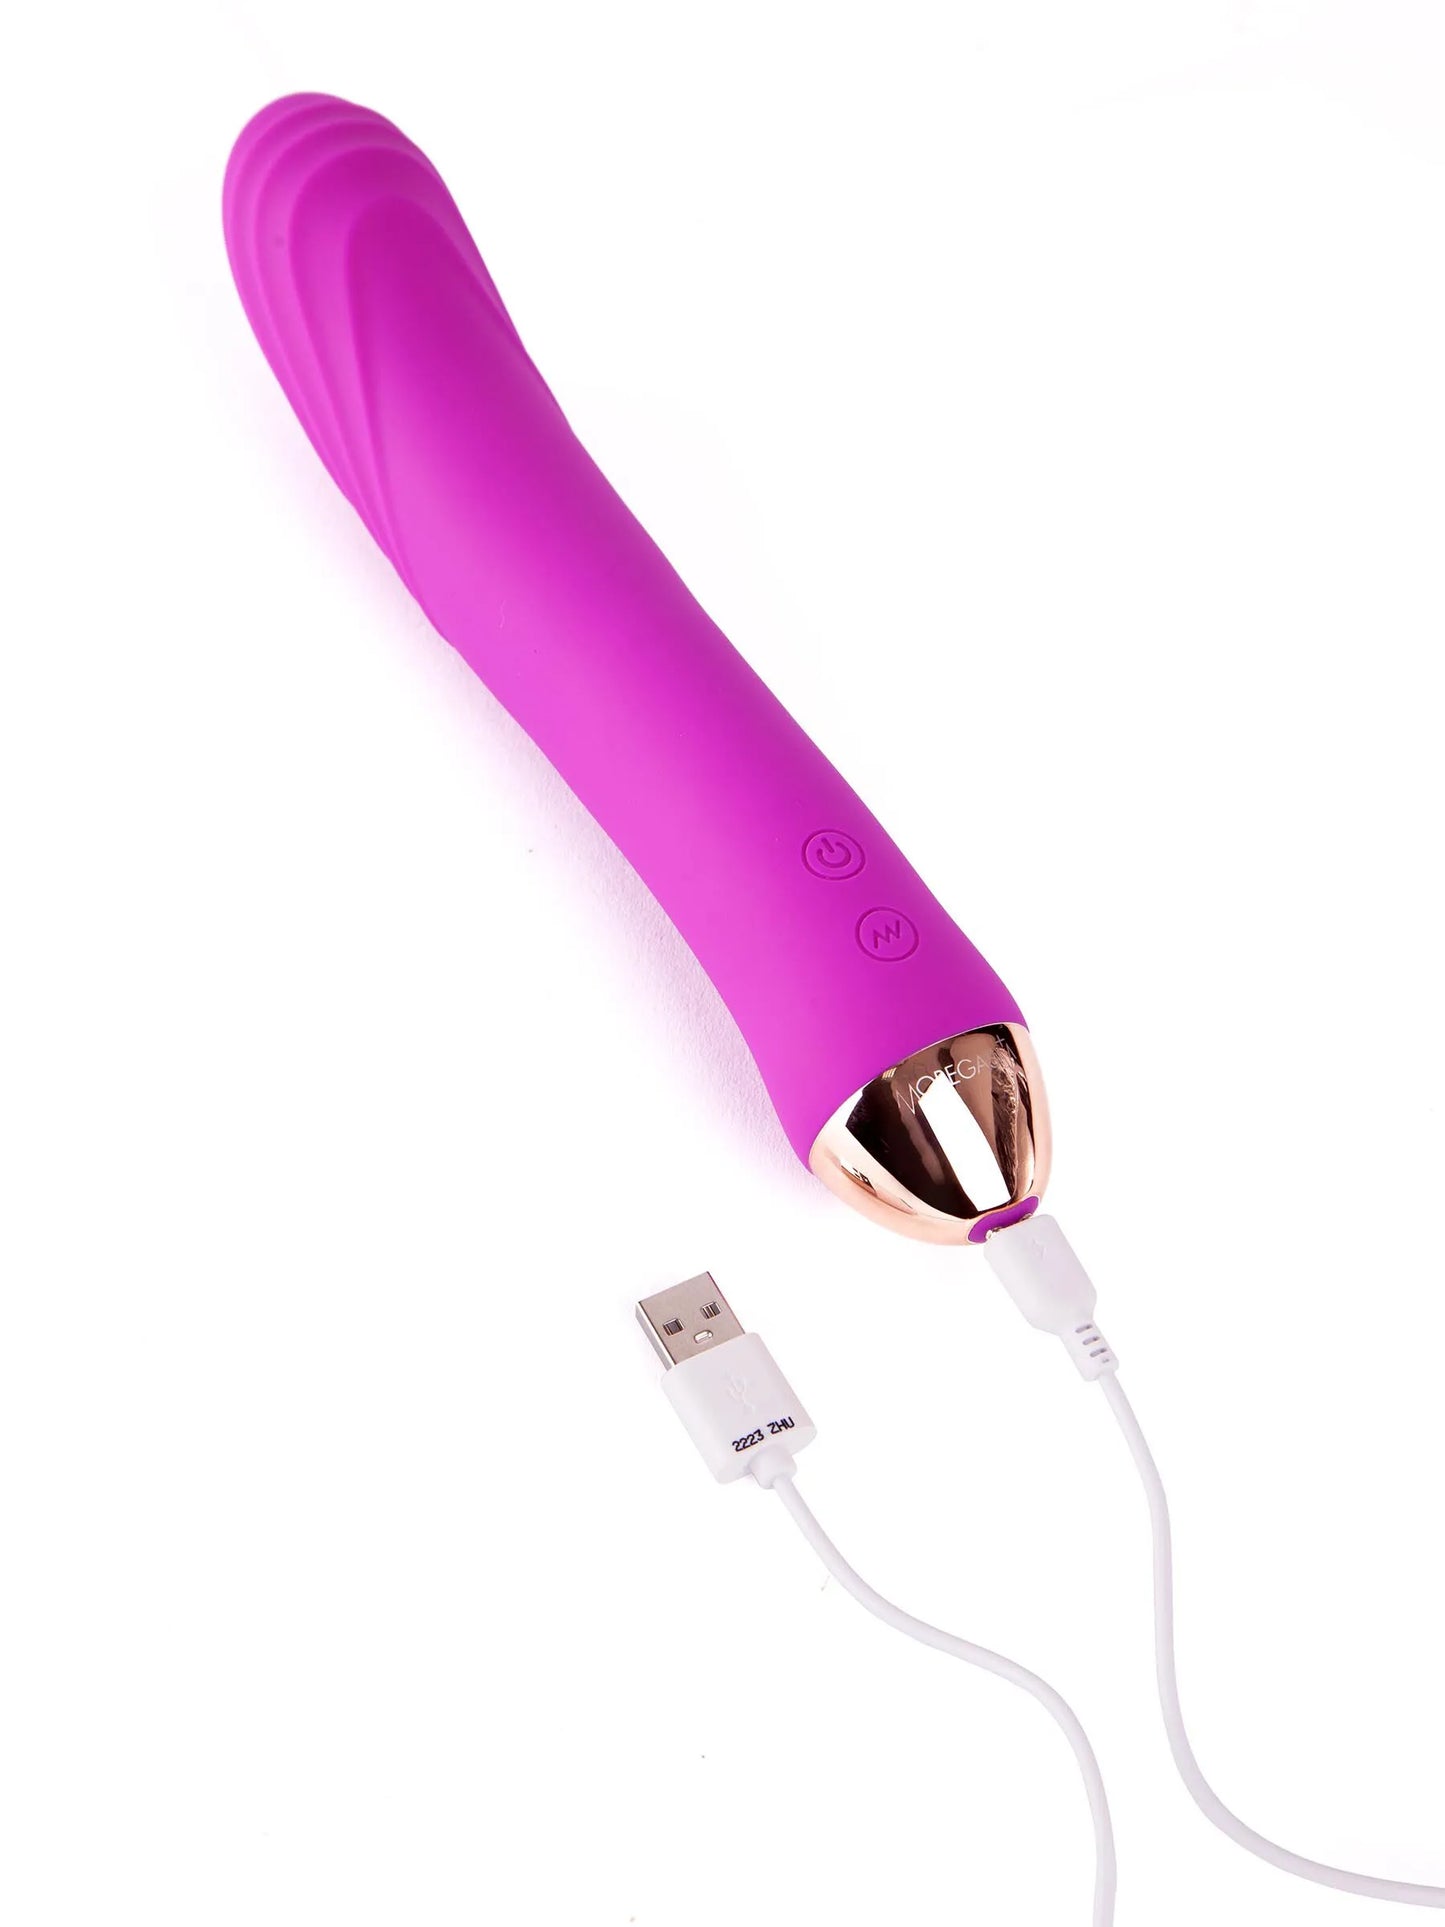 Moregasm Plus Boost G Spot From Ann Summers, Image 02